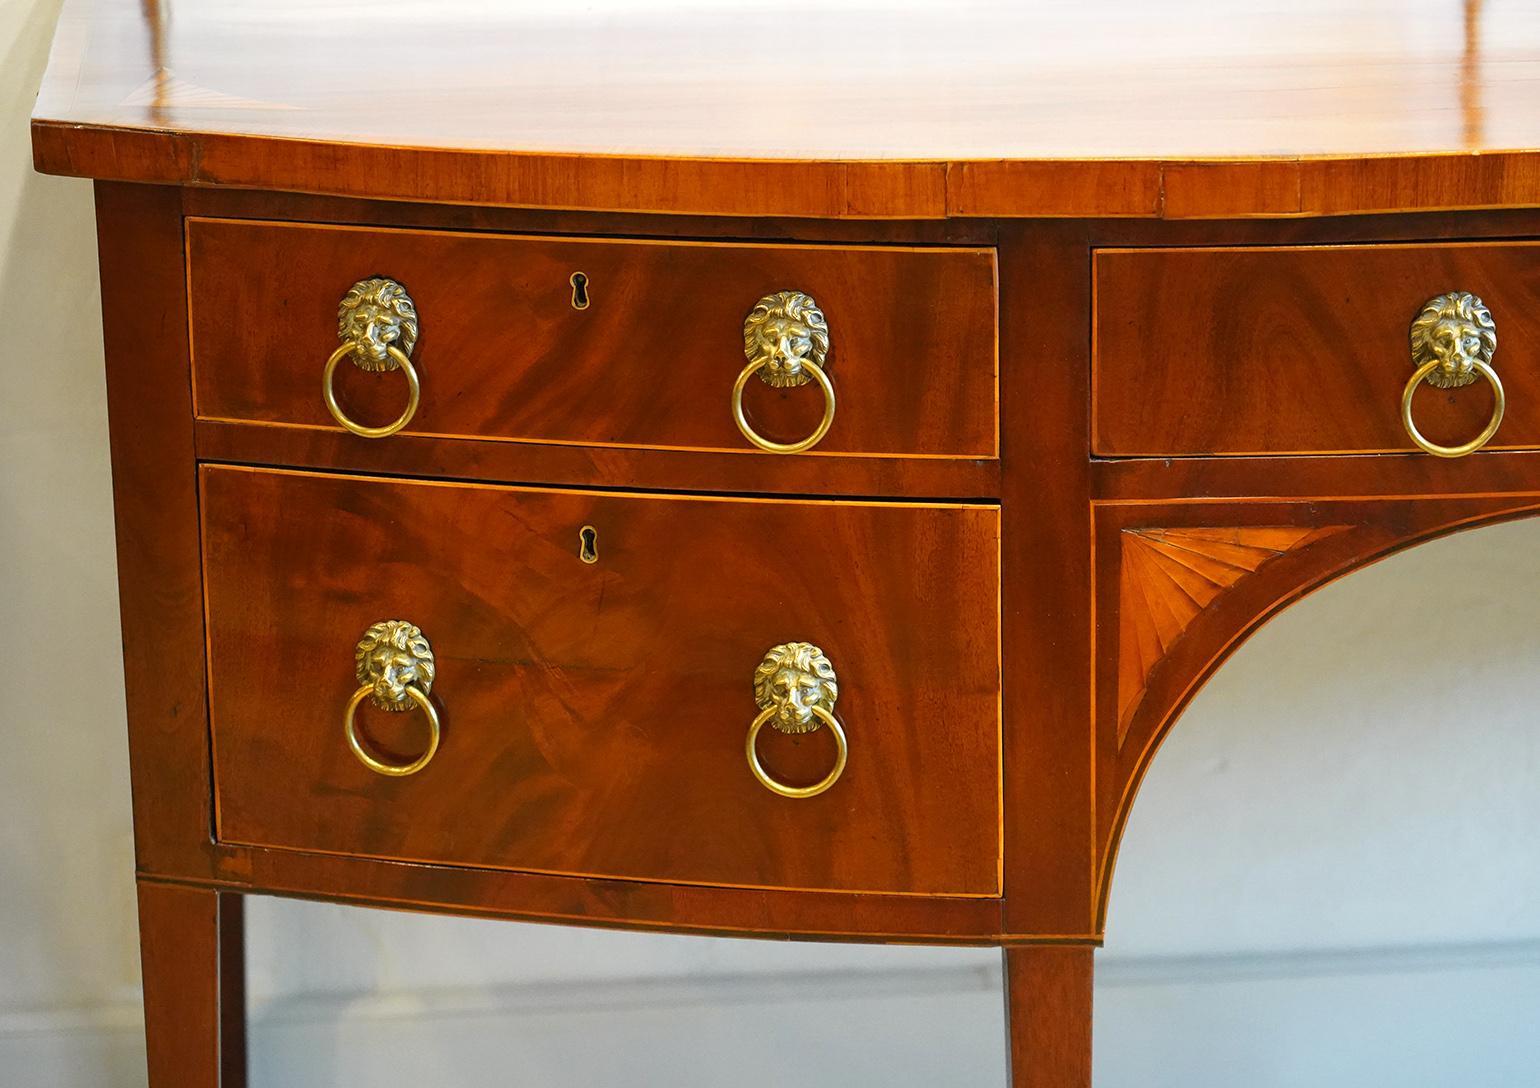 This George III bowfront sideboard features a polished banded one plank top with double brass rail along the back. The front has a center drawer flanked by two drawers to the left and one deep drawer to the right looking like two drawers. All